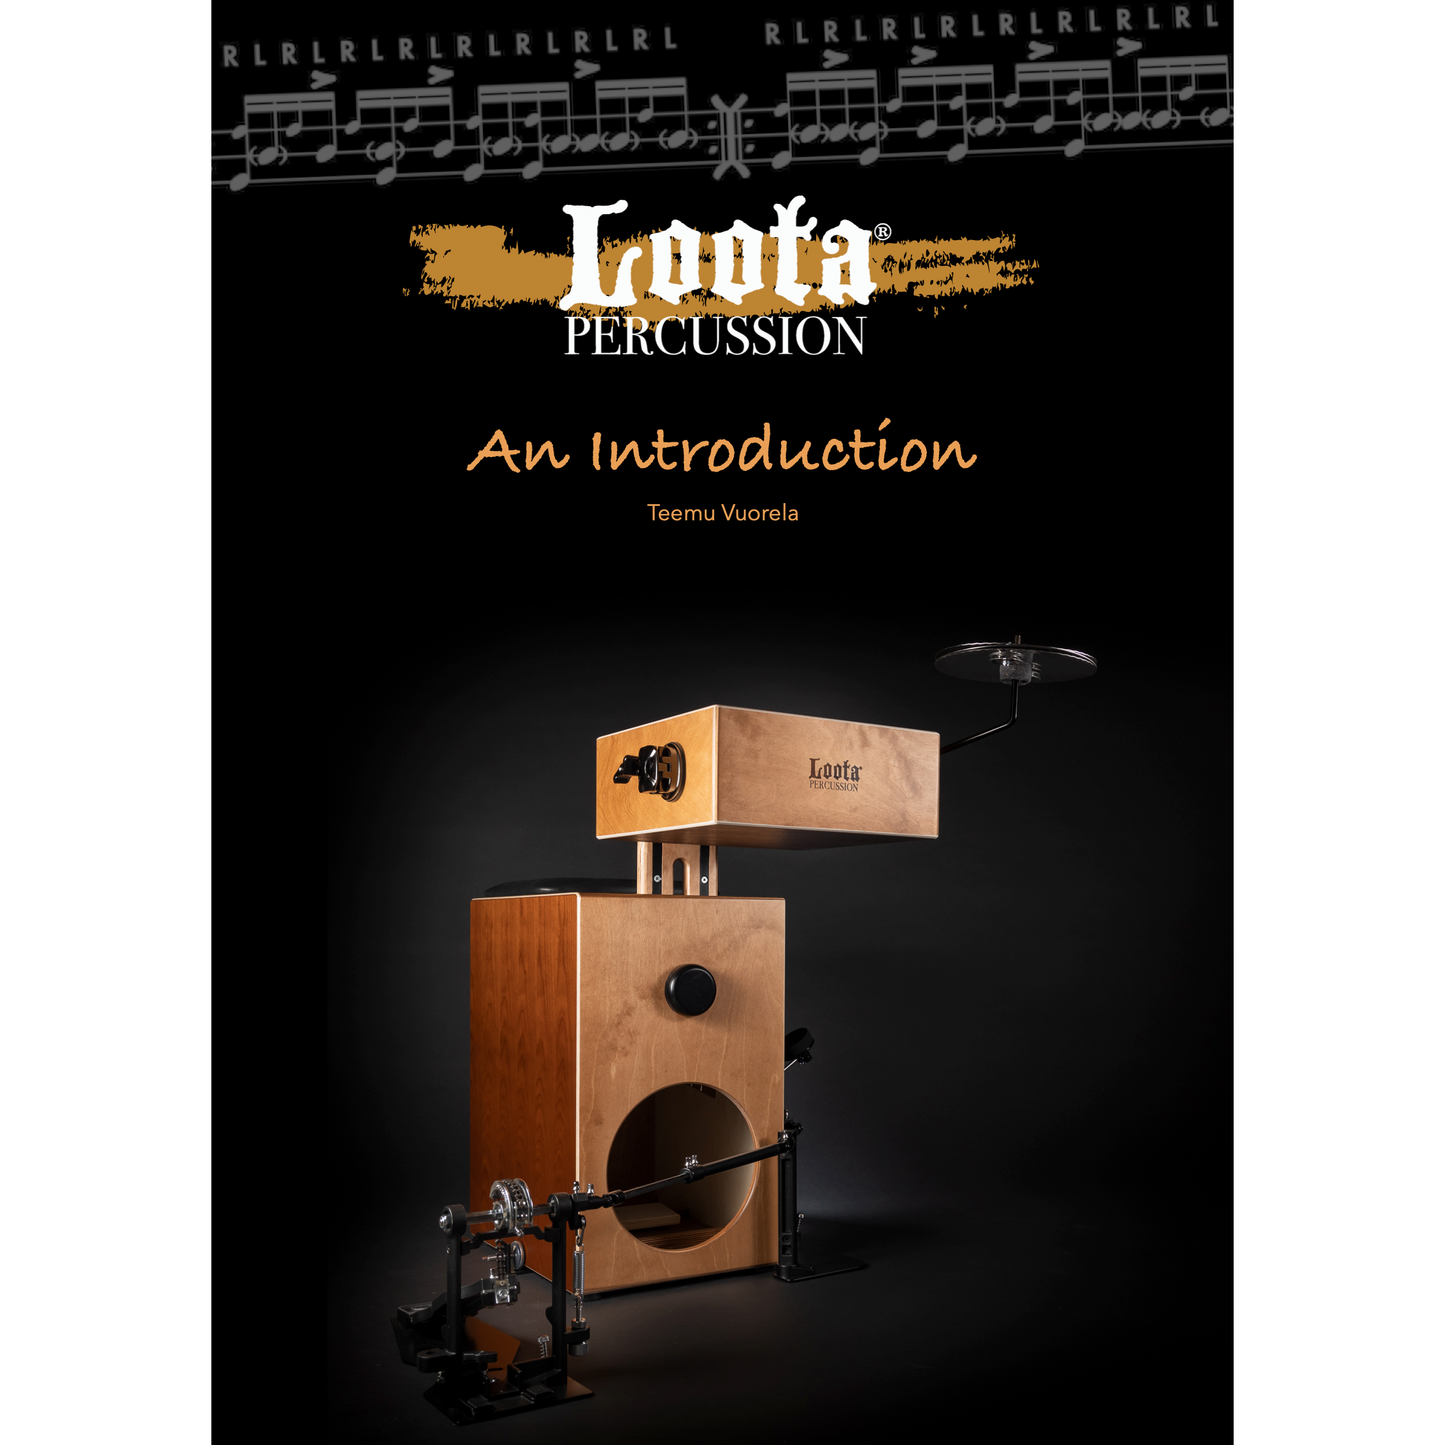 An introduction book